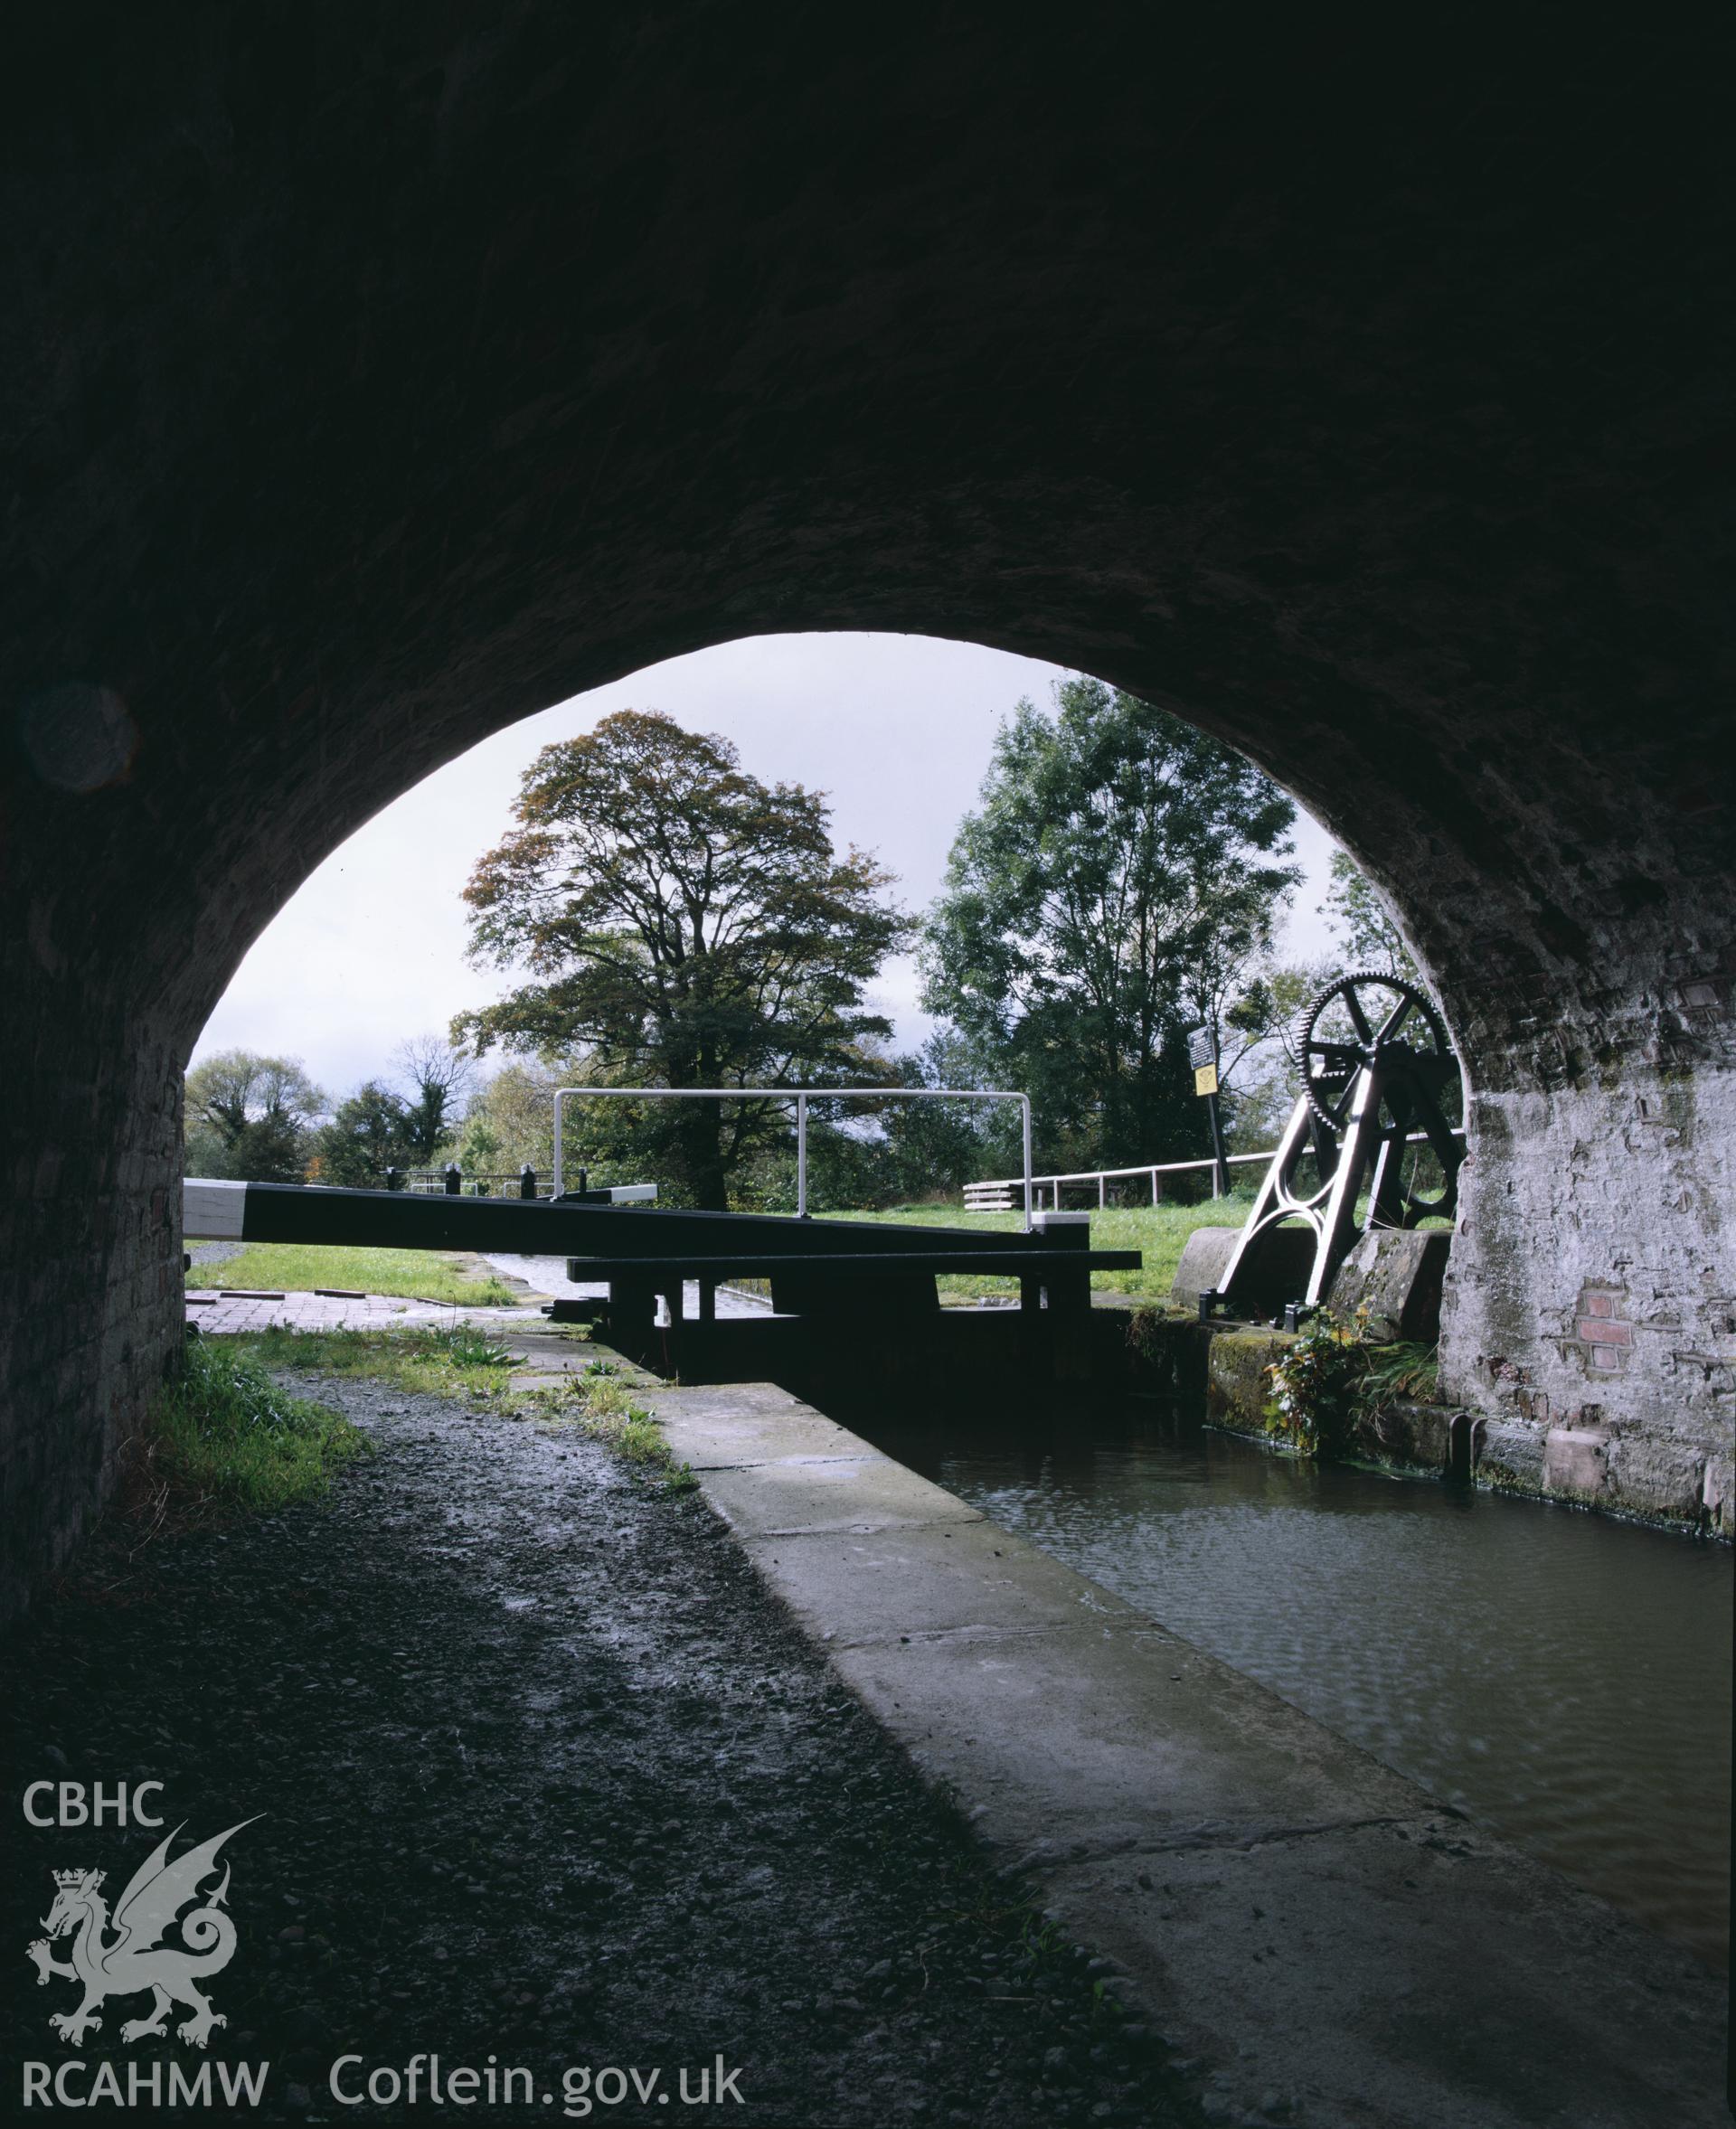 Colour transparency showing a view from under the bridge at Burgedin Lock on the Montgomeryshire Canal, produced by Iain Wright 1980